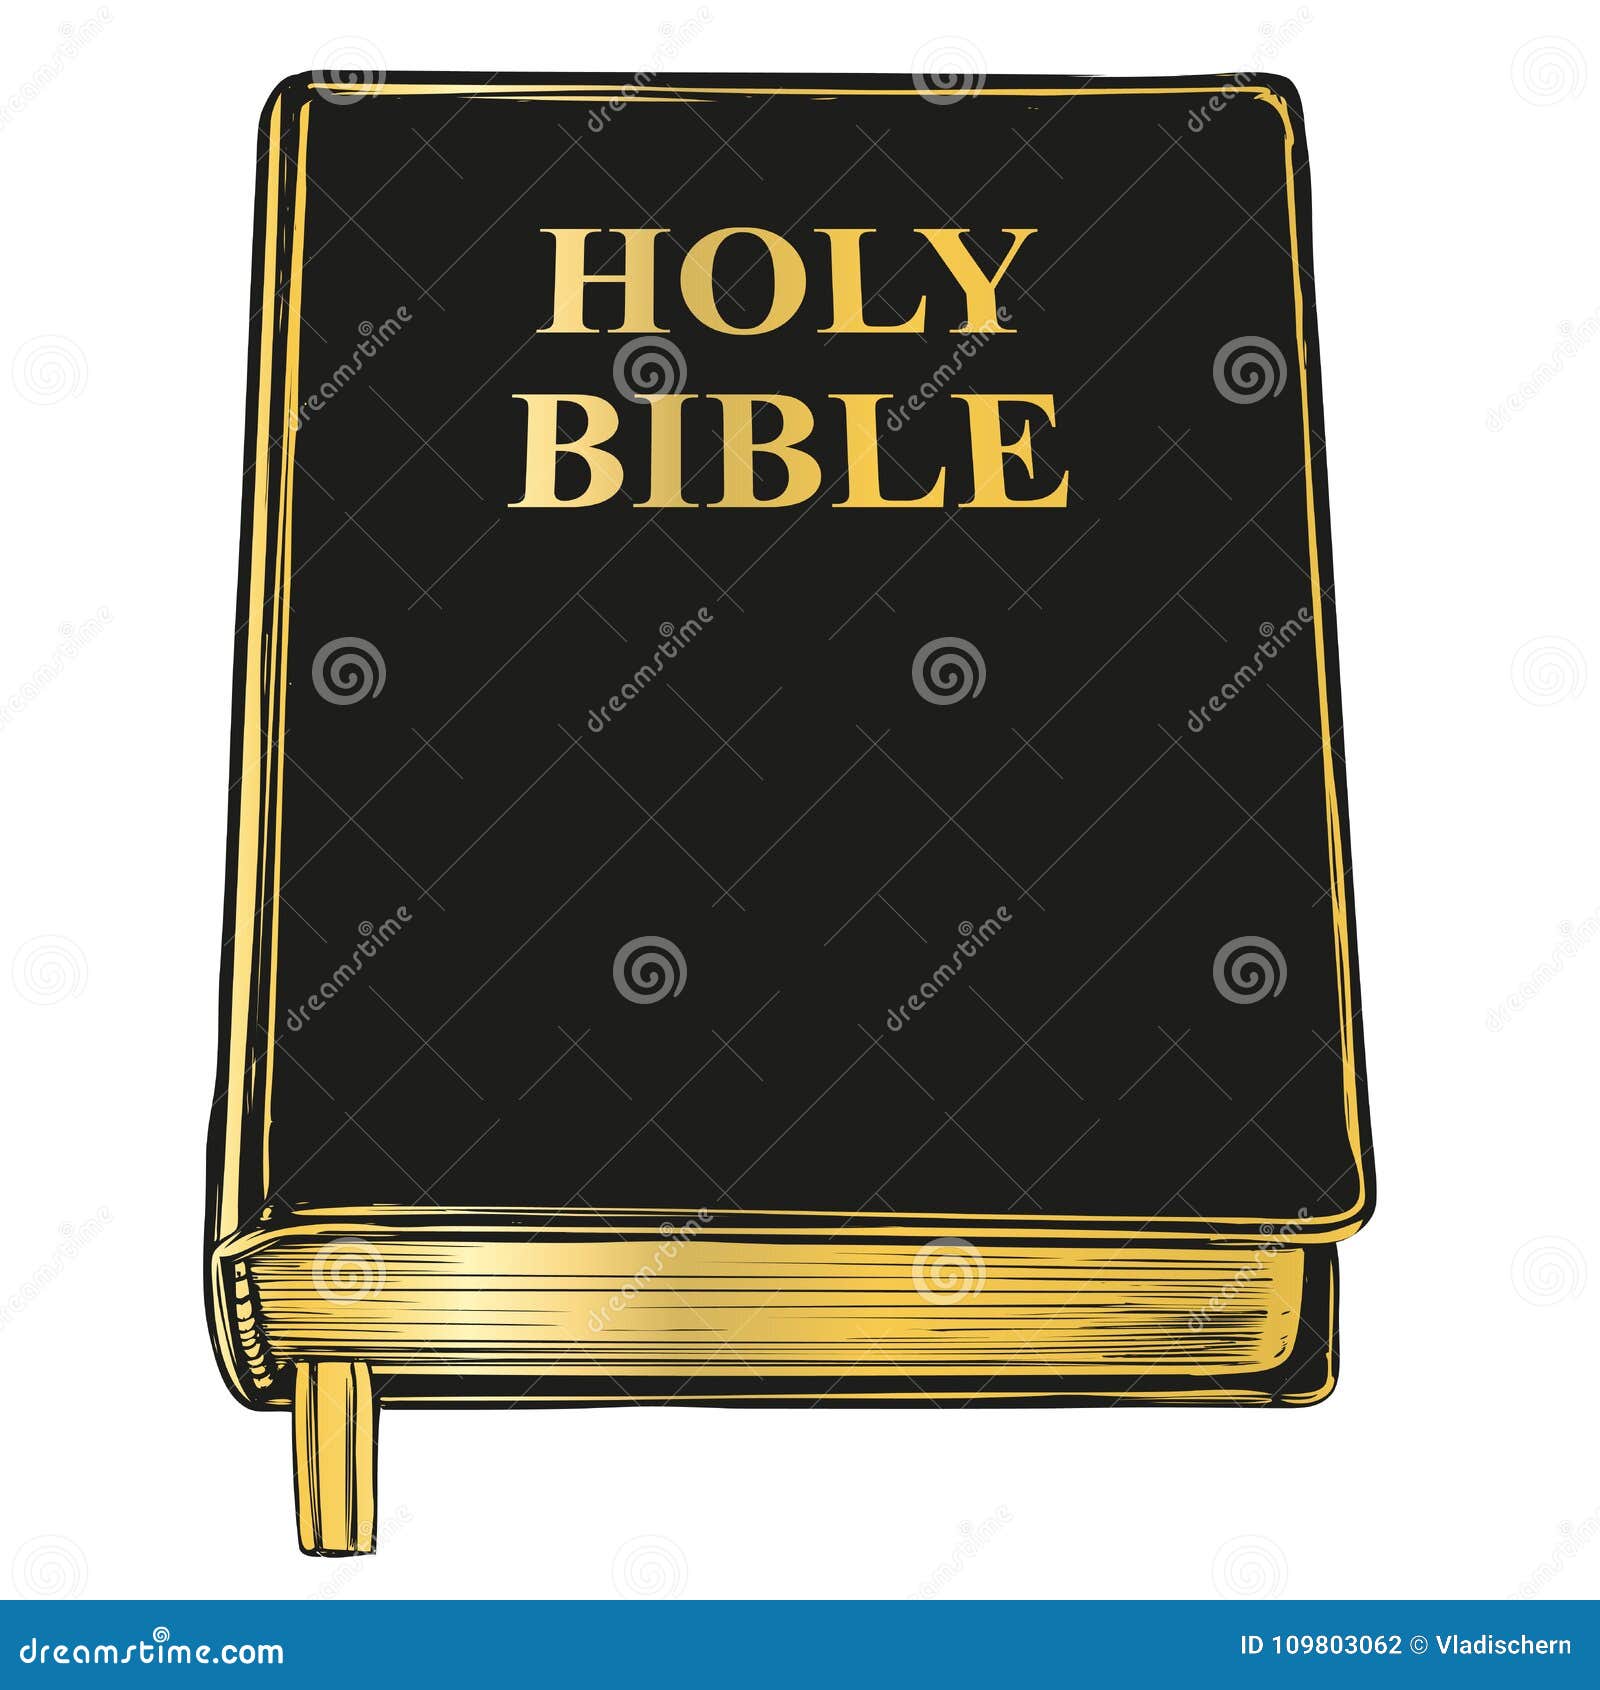 bible, gospel, the doctrine of christianity,  of christianity hand drawn   sketch